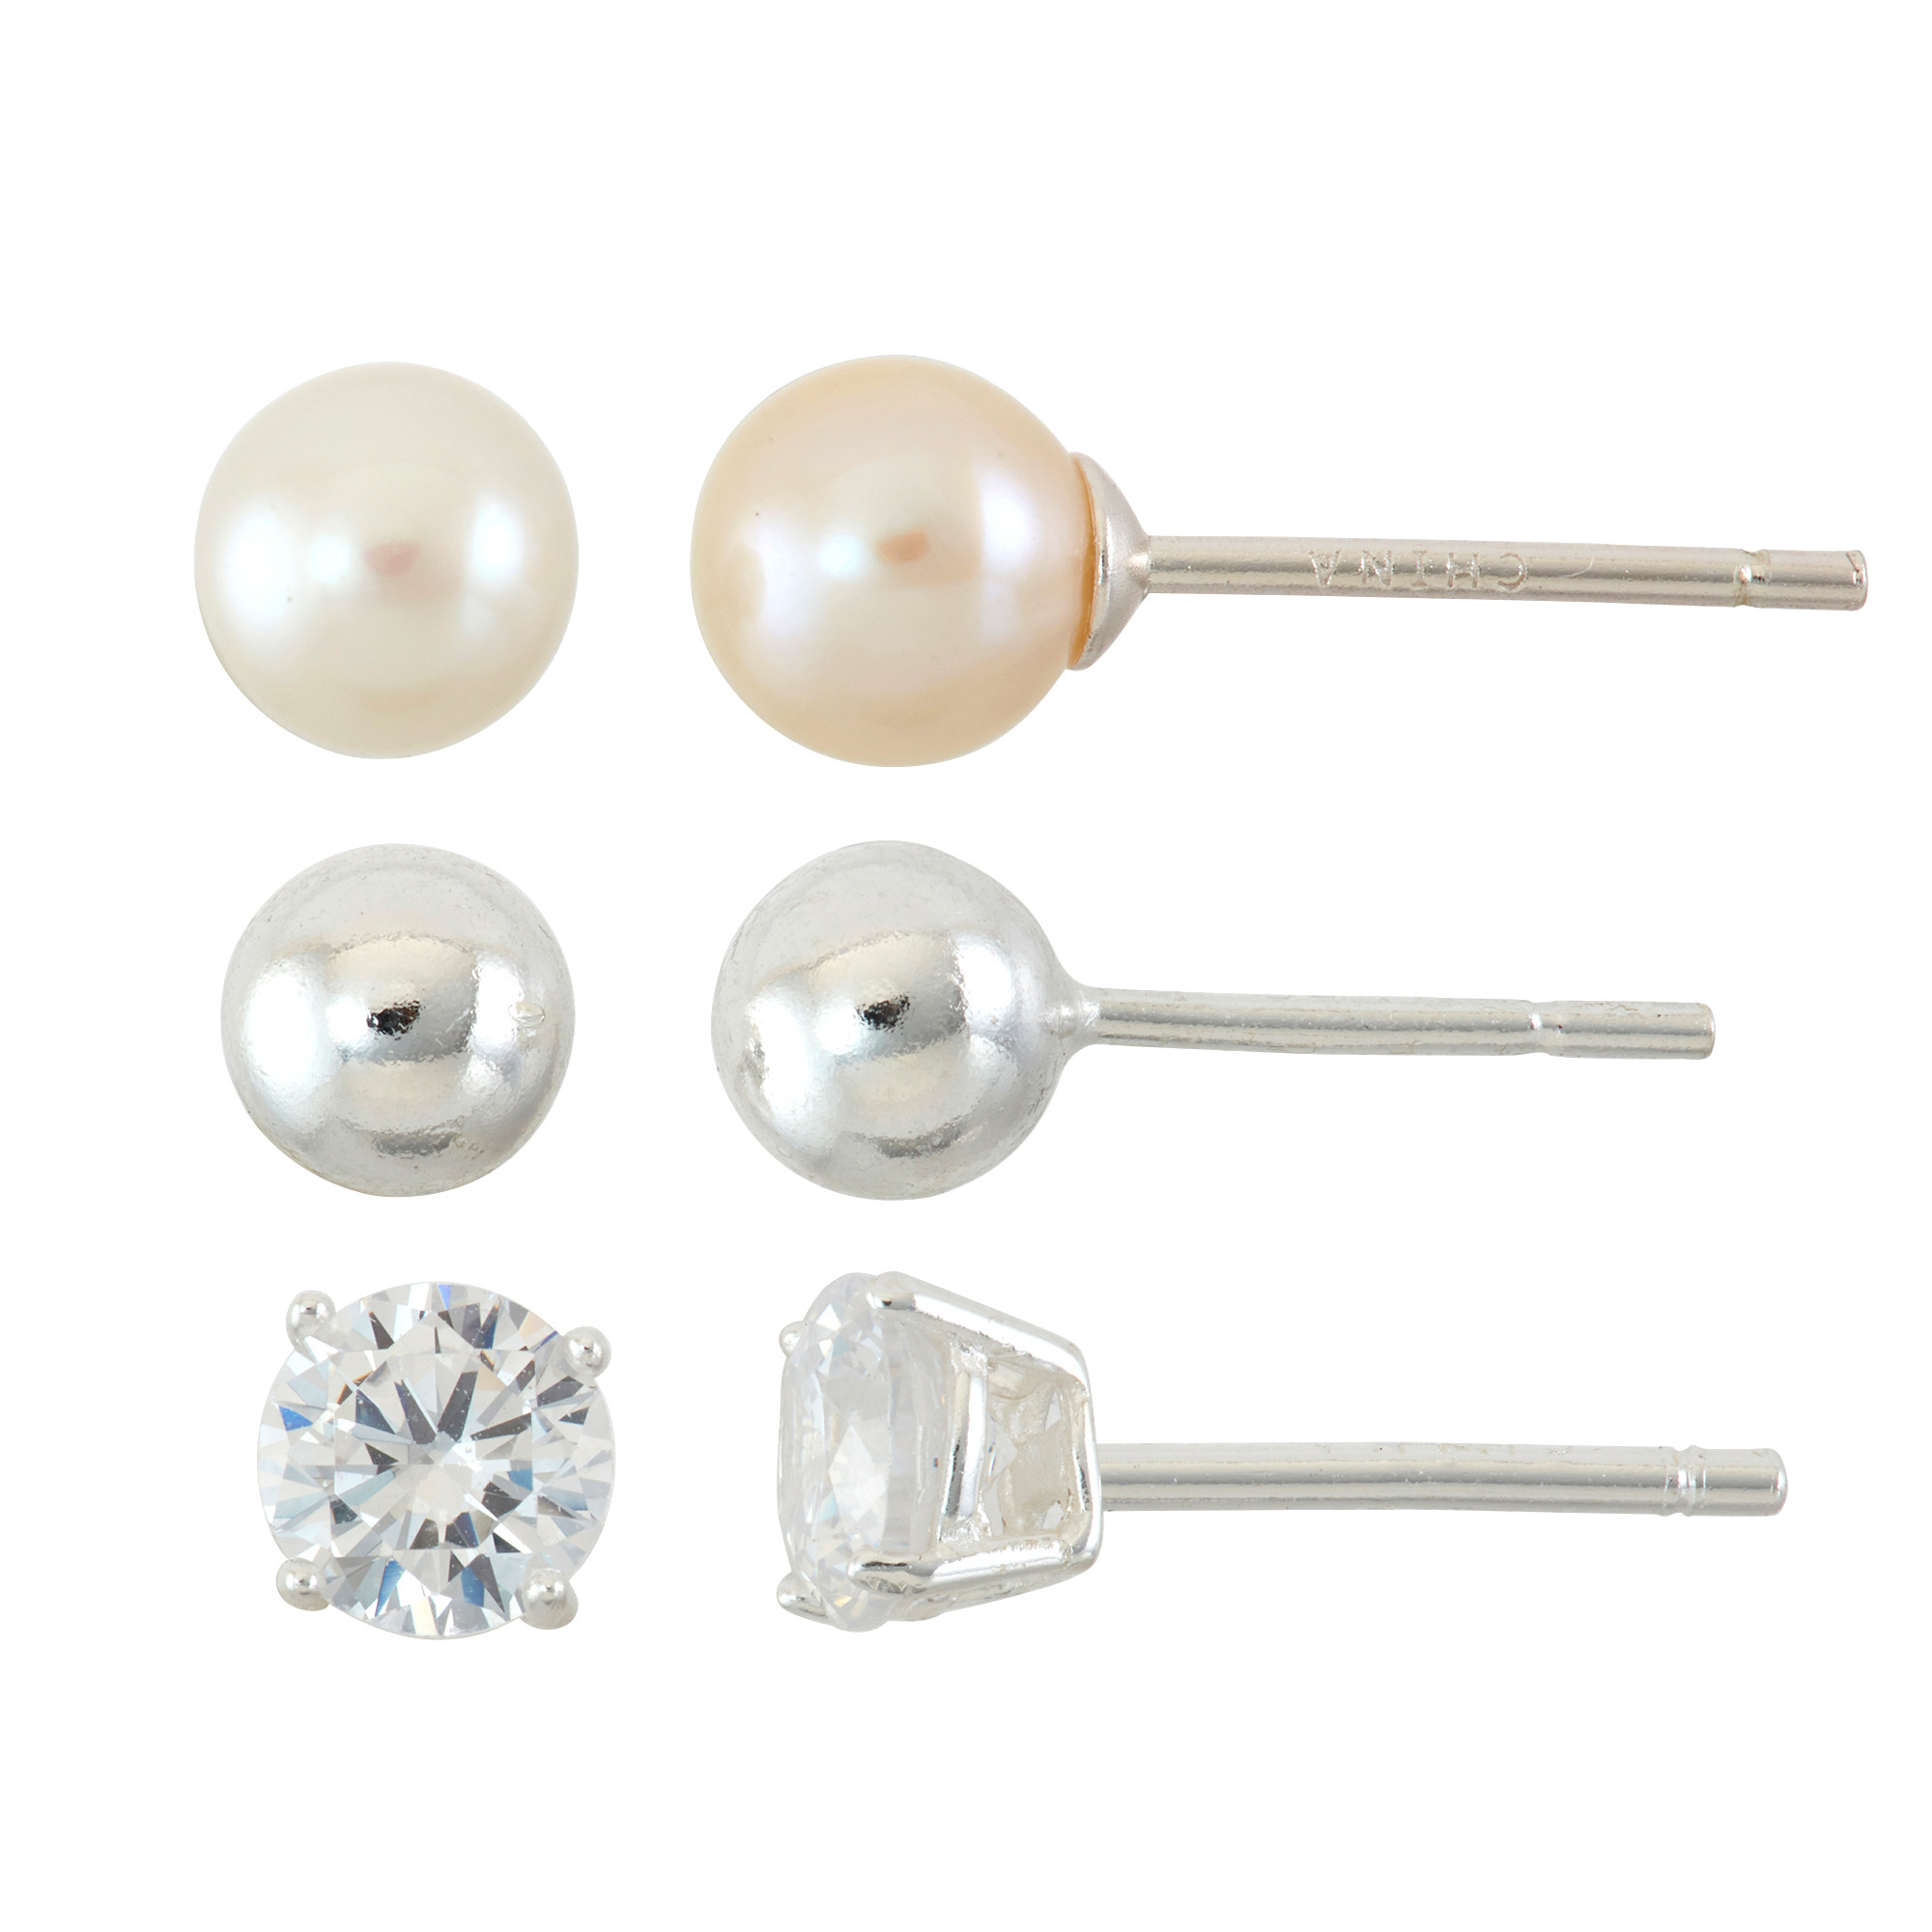 Sterling Silver Stud Earrings Set
 Sterling Silver 3 Pair Cubic Zirconia Pearl and Ball Stud